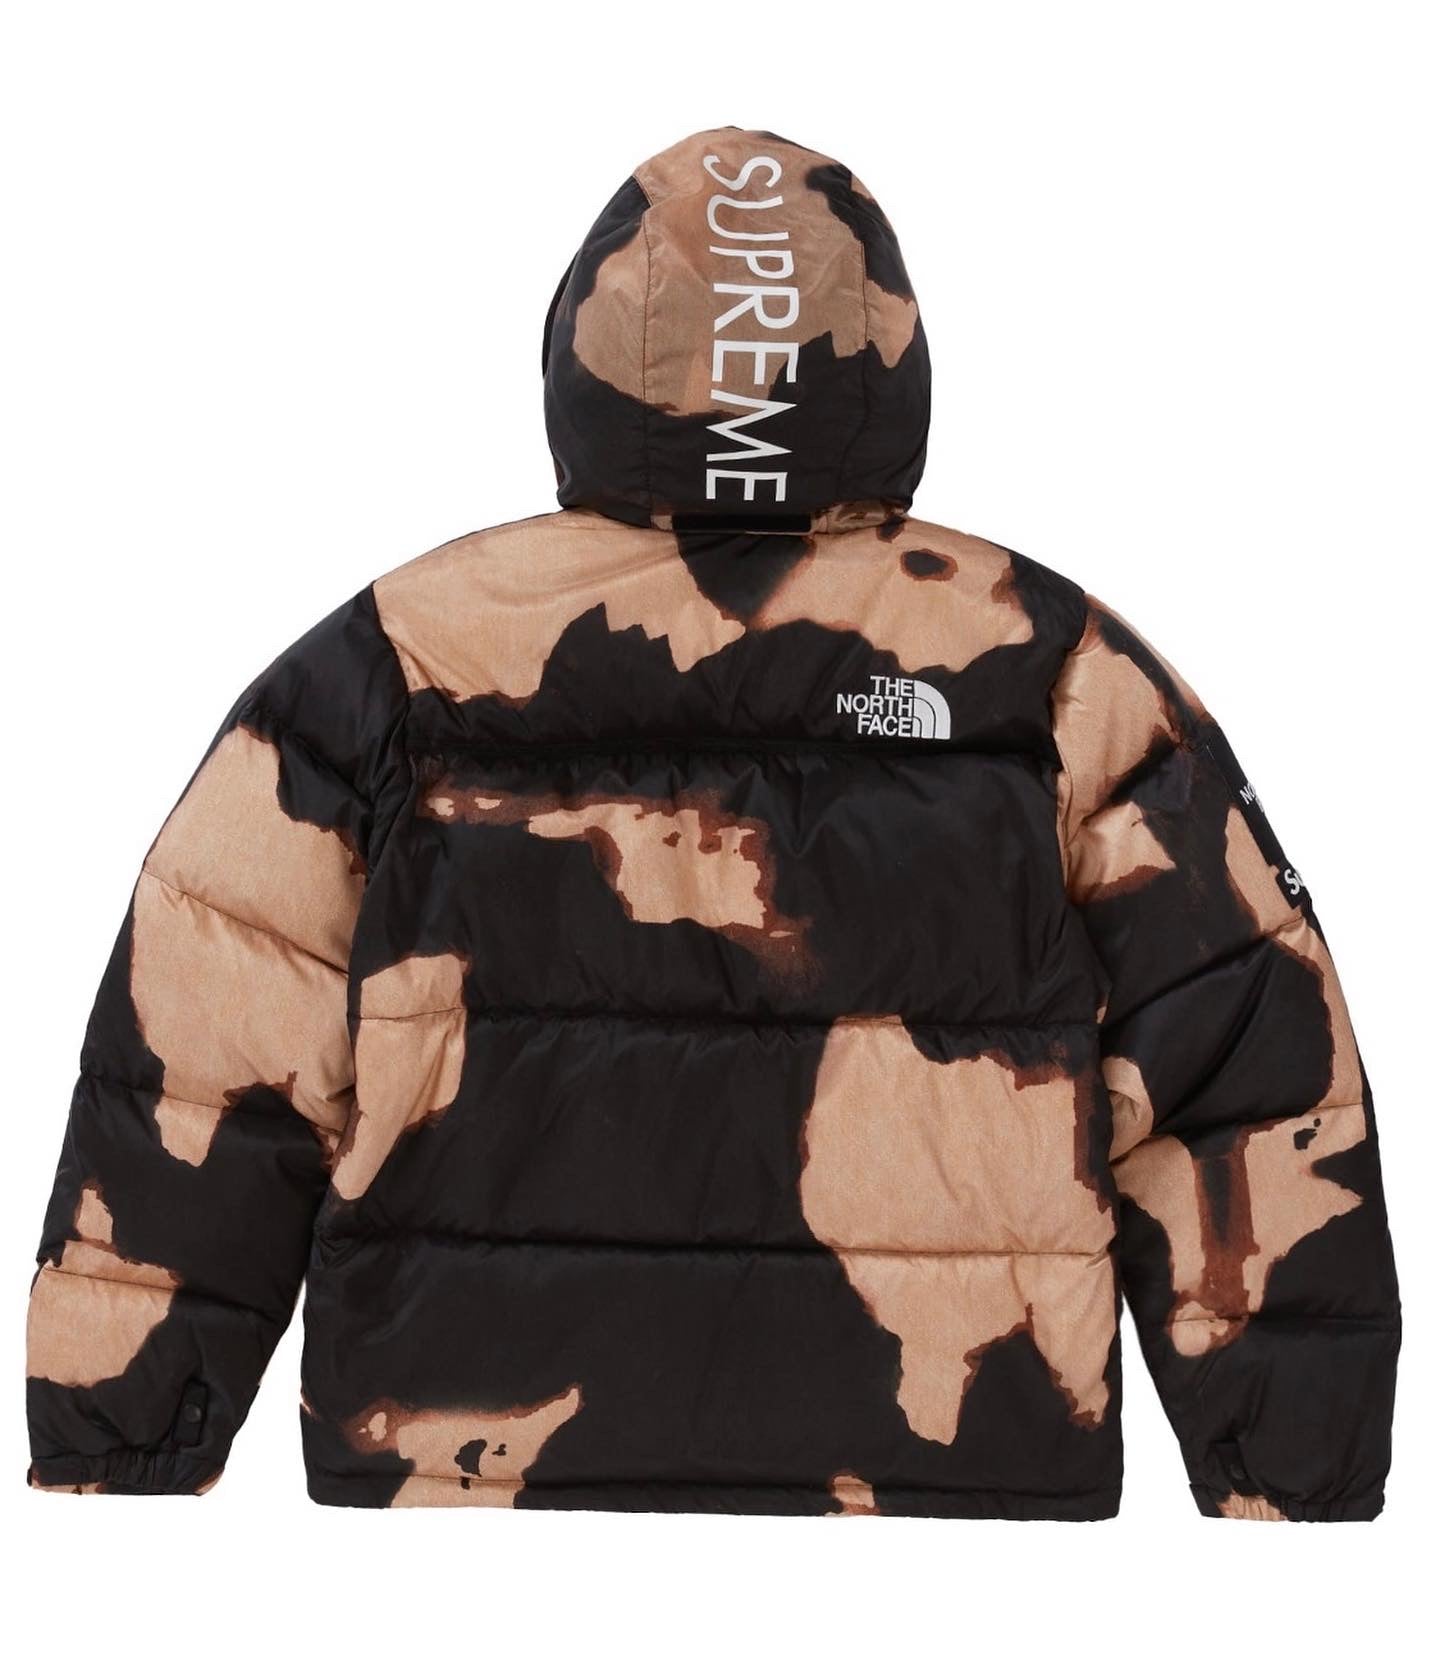 SUPREME x The North Face Jacket